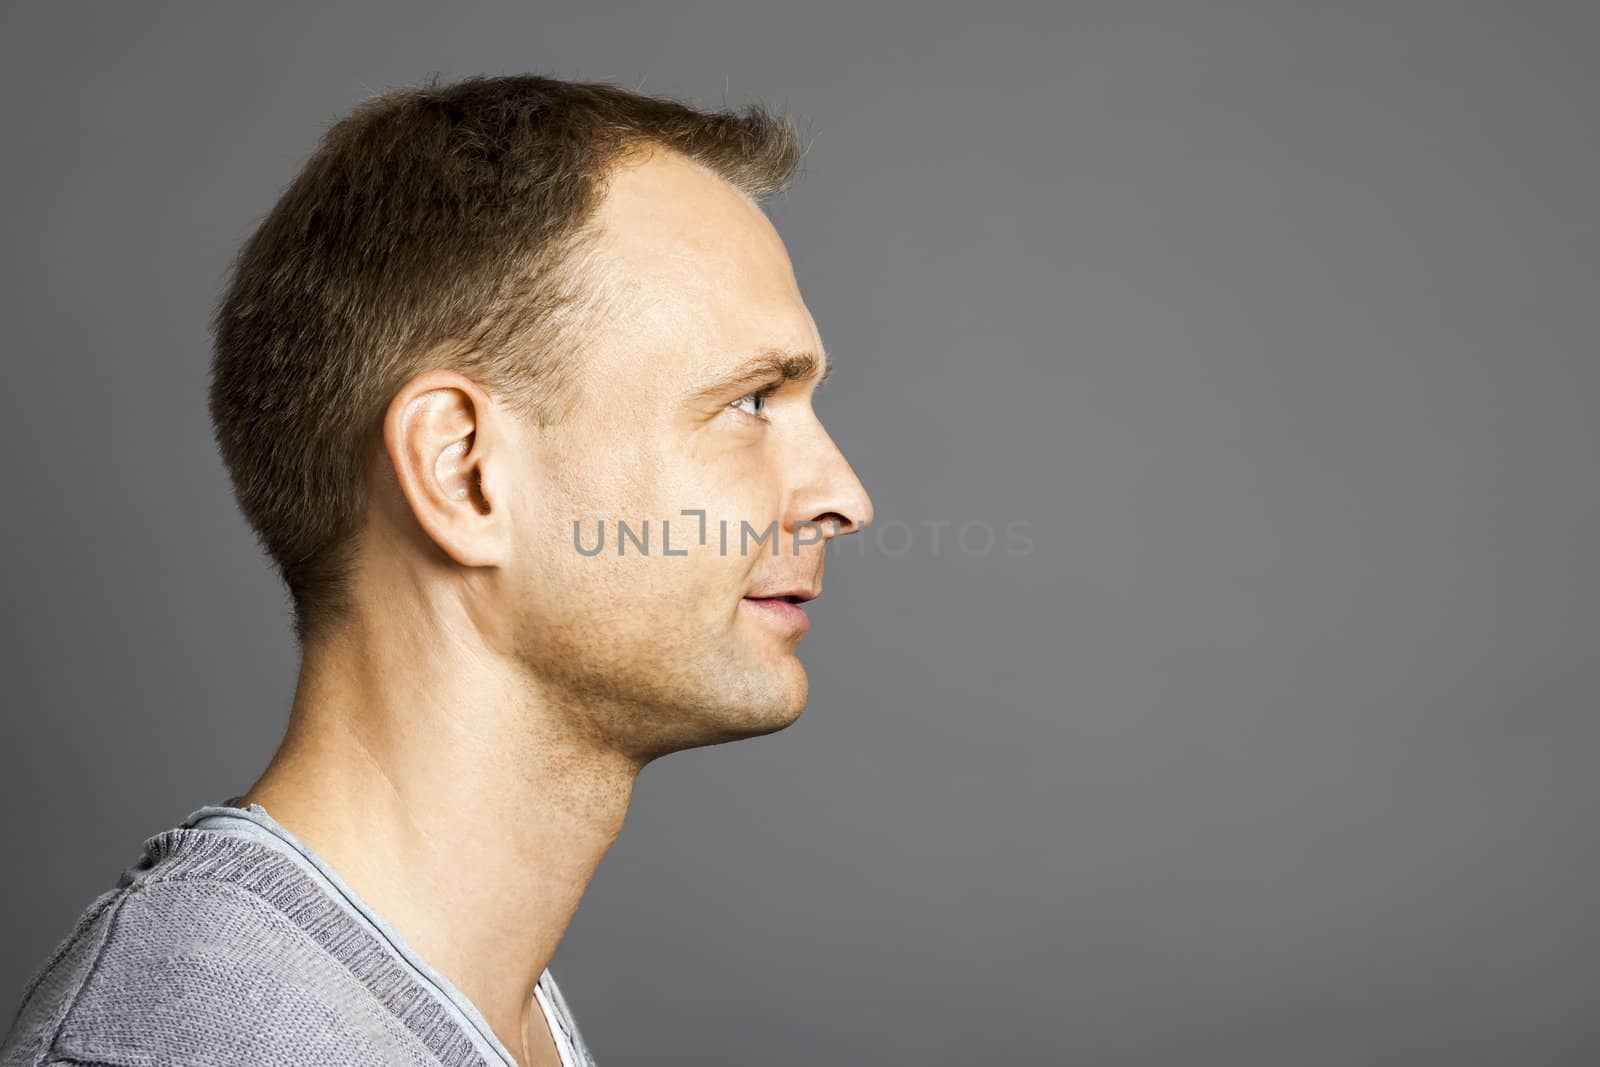 An image of a nice male portrait side view